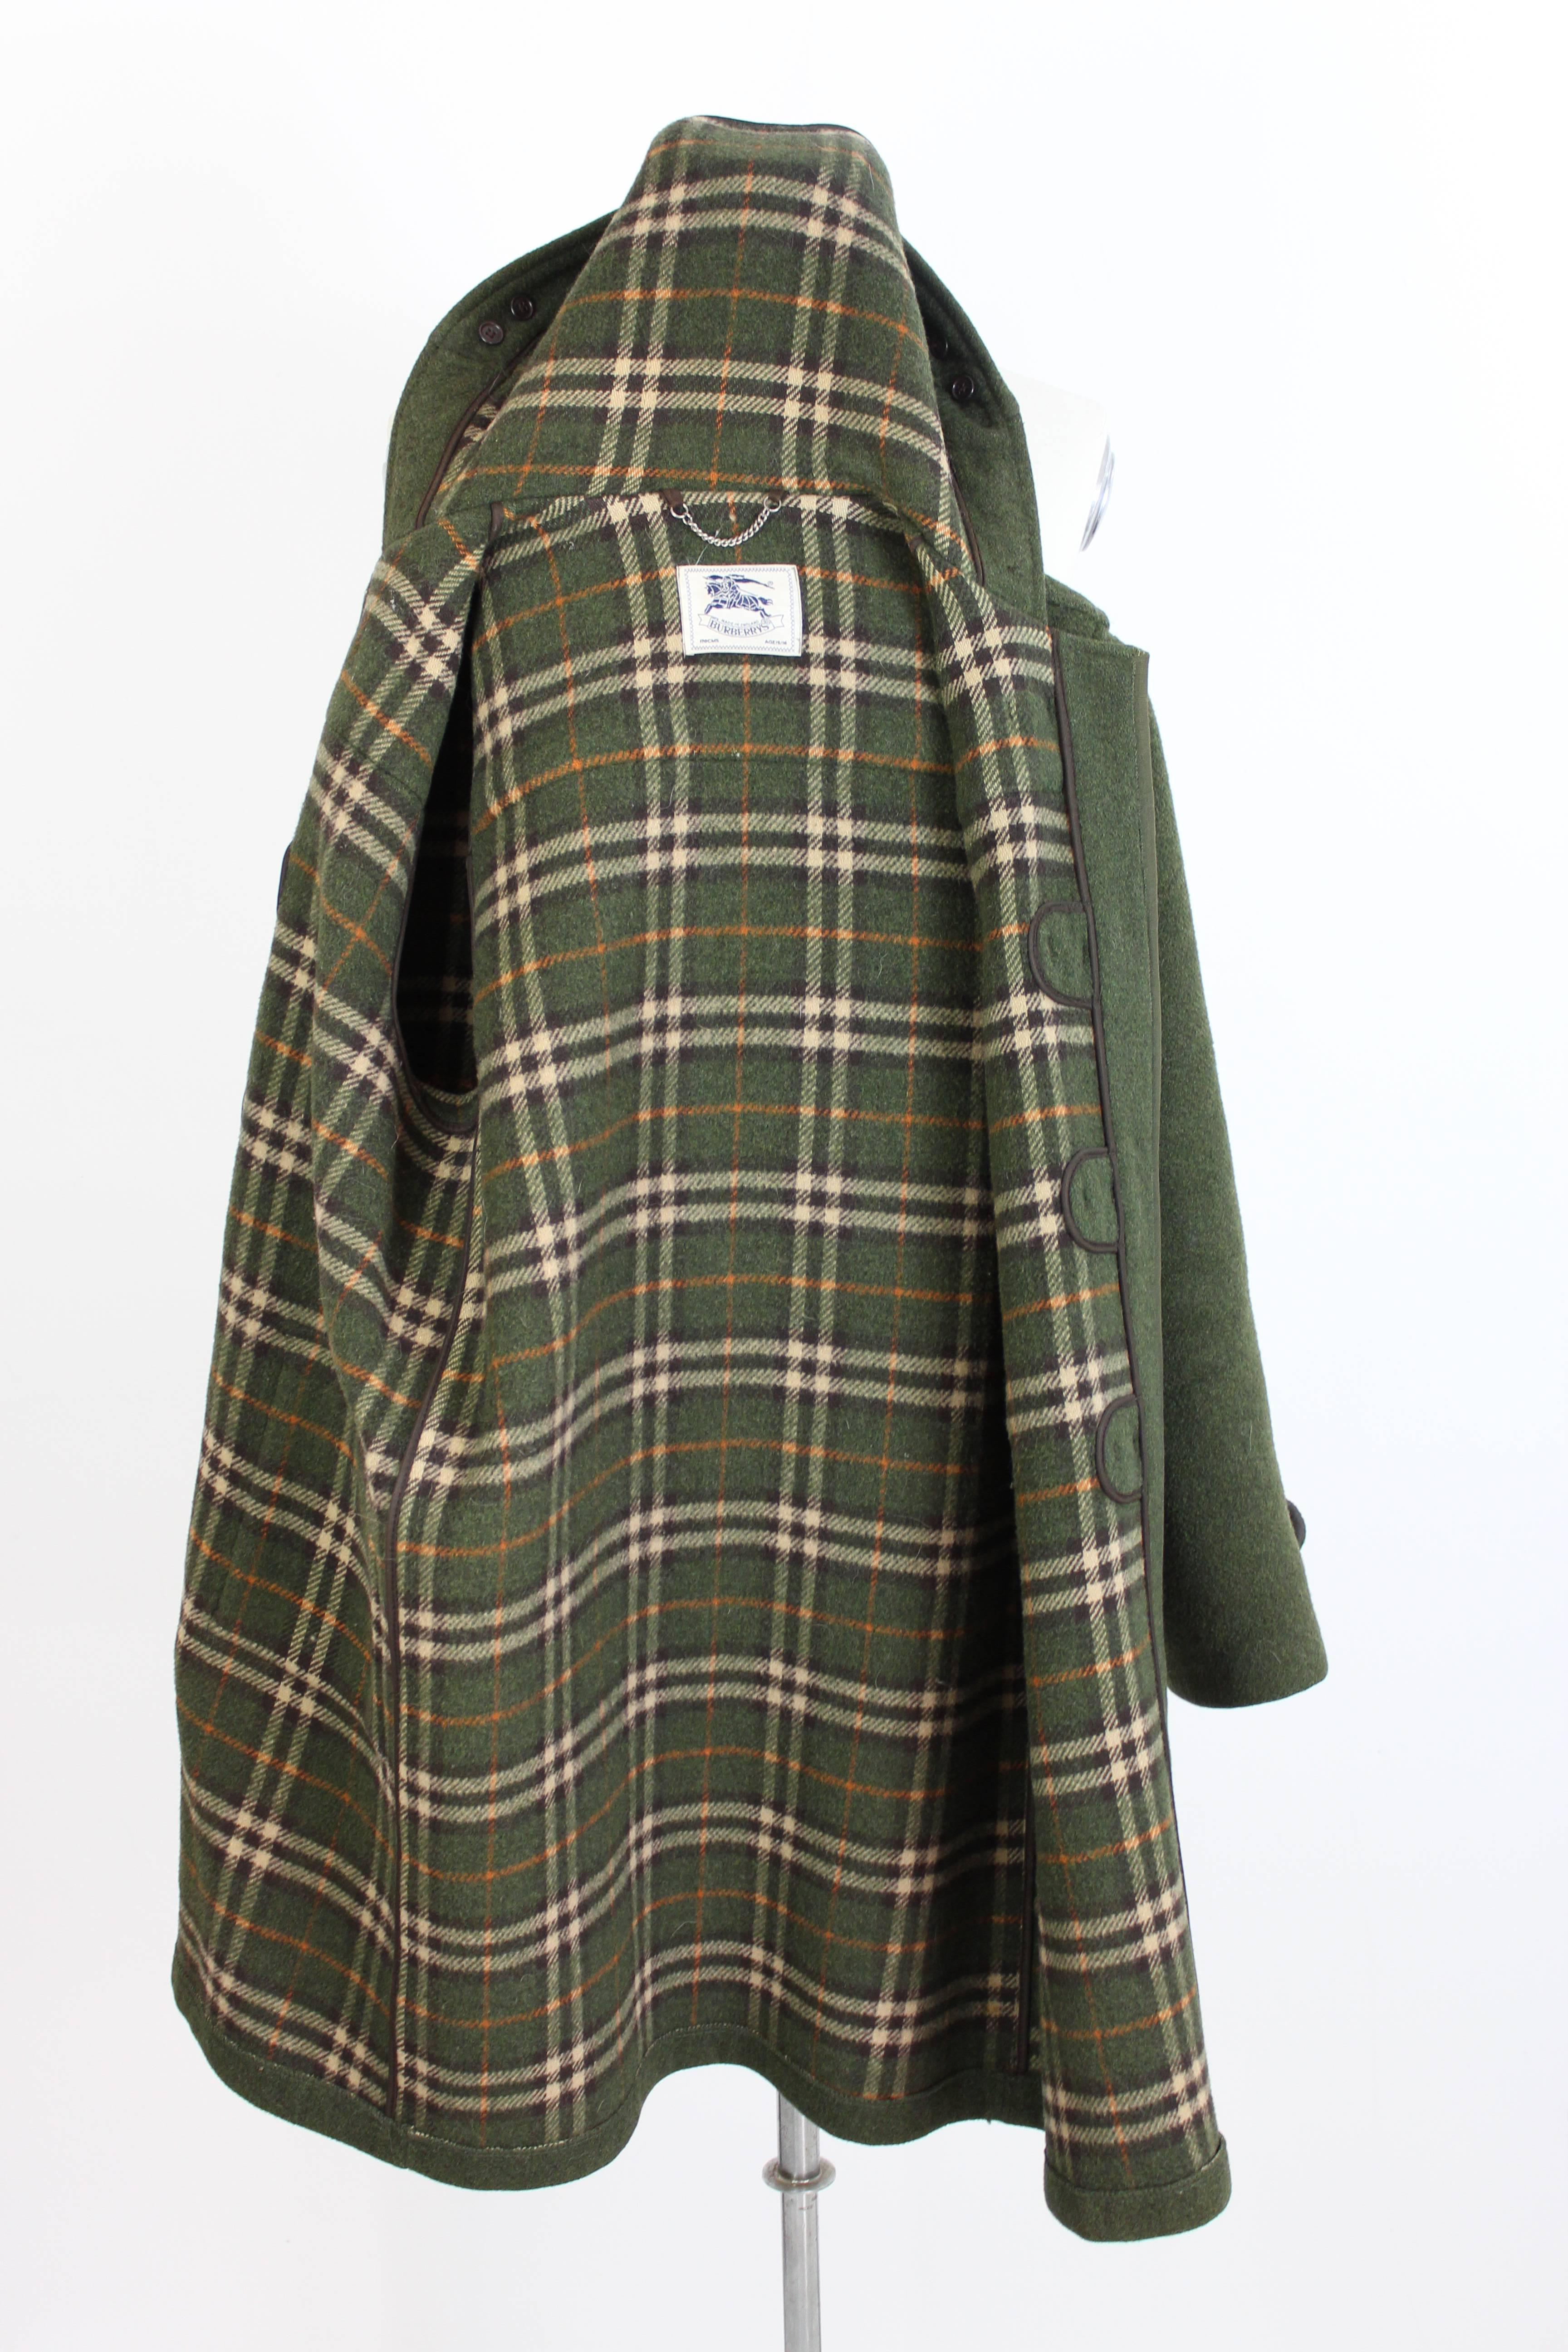 Burberry Montgomery Dark Green Wool English Coat, 1980 In Excellent Condition For Sale In Brindisi, IT